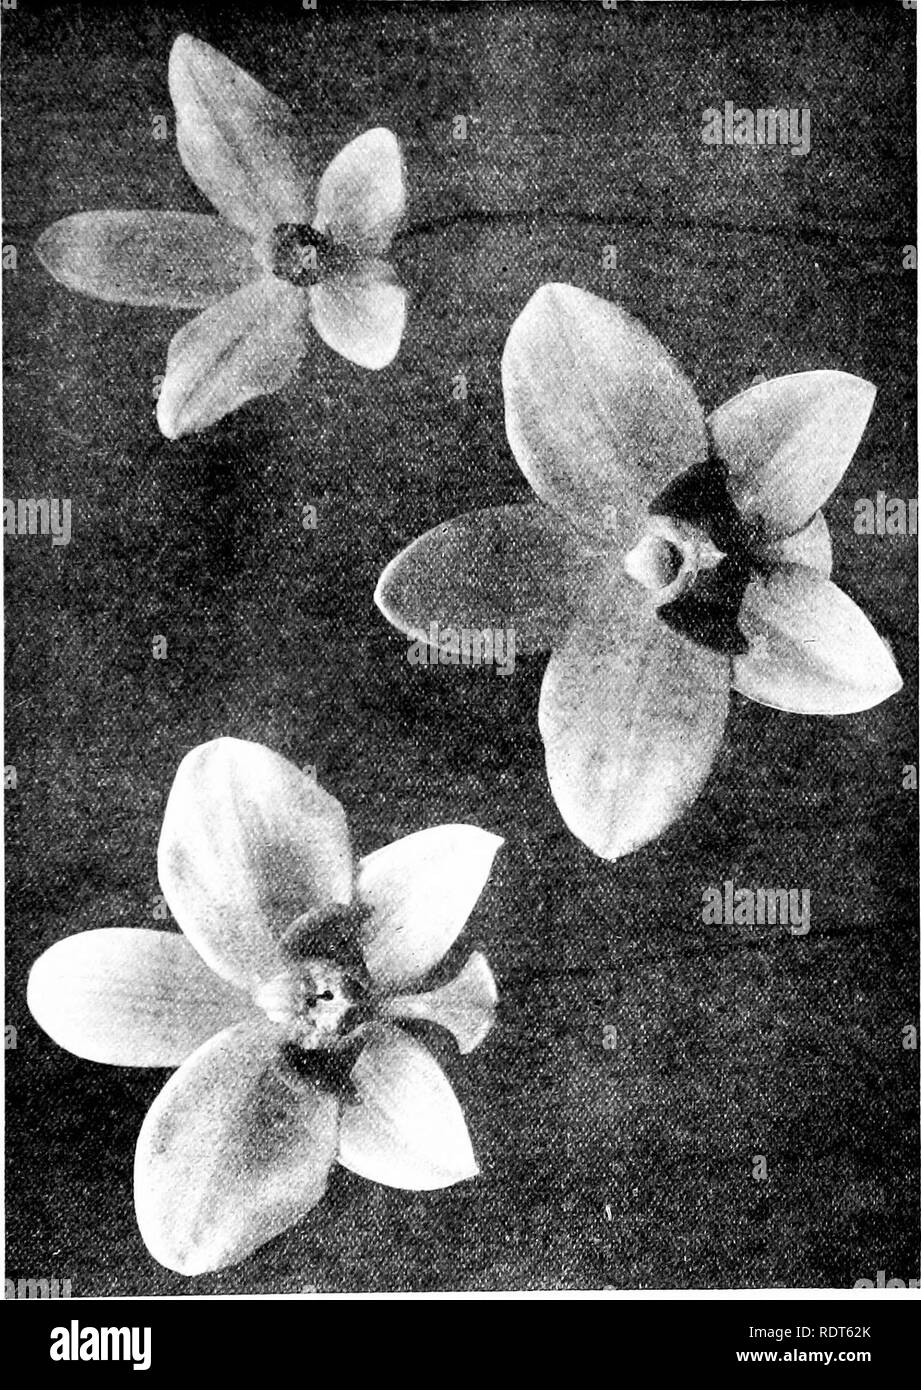 . The orchid stud-book: an enumeration of hybrid orchids of artificial origin, with their parents, raisers, date of first flowering, references to descriptions and figures, and synonymy. With an historical introduction and 120 figures and a chapter on hybridising and raising orchids from seed. Orchids. Part II. Suppi; THE ORCHID STUD-BOOK. 311 9a. S.-o. X warnhamensis (C. amethystoglossa x S. grandiflora), G.C. 1904, ii. 355; 1906, i. 158; O.K. 1904,366; 1906, 108; J. H. 1906, i. 295, f (v. Cerise); G.M. 1906,547, f. âLucas, 1904. 36. S0PHR0L/ELIA. 3. S-l. X I seta (p. 236); J. H 1905, ii. 99, Stock Photo